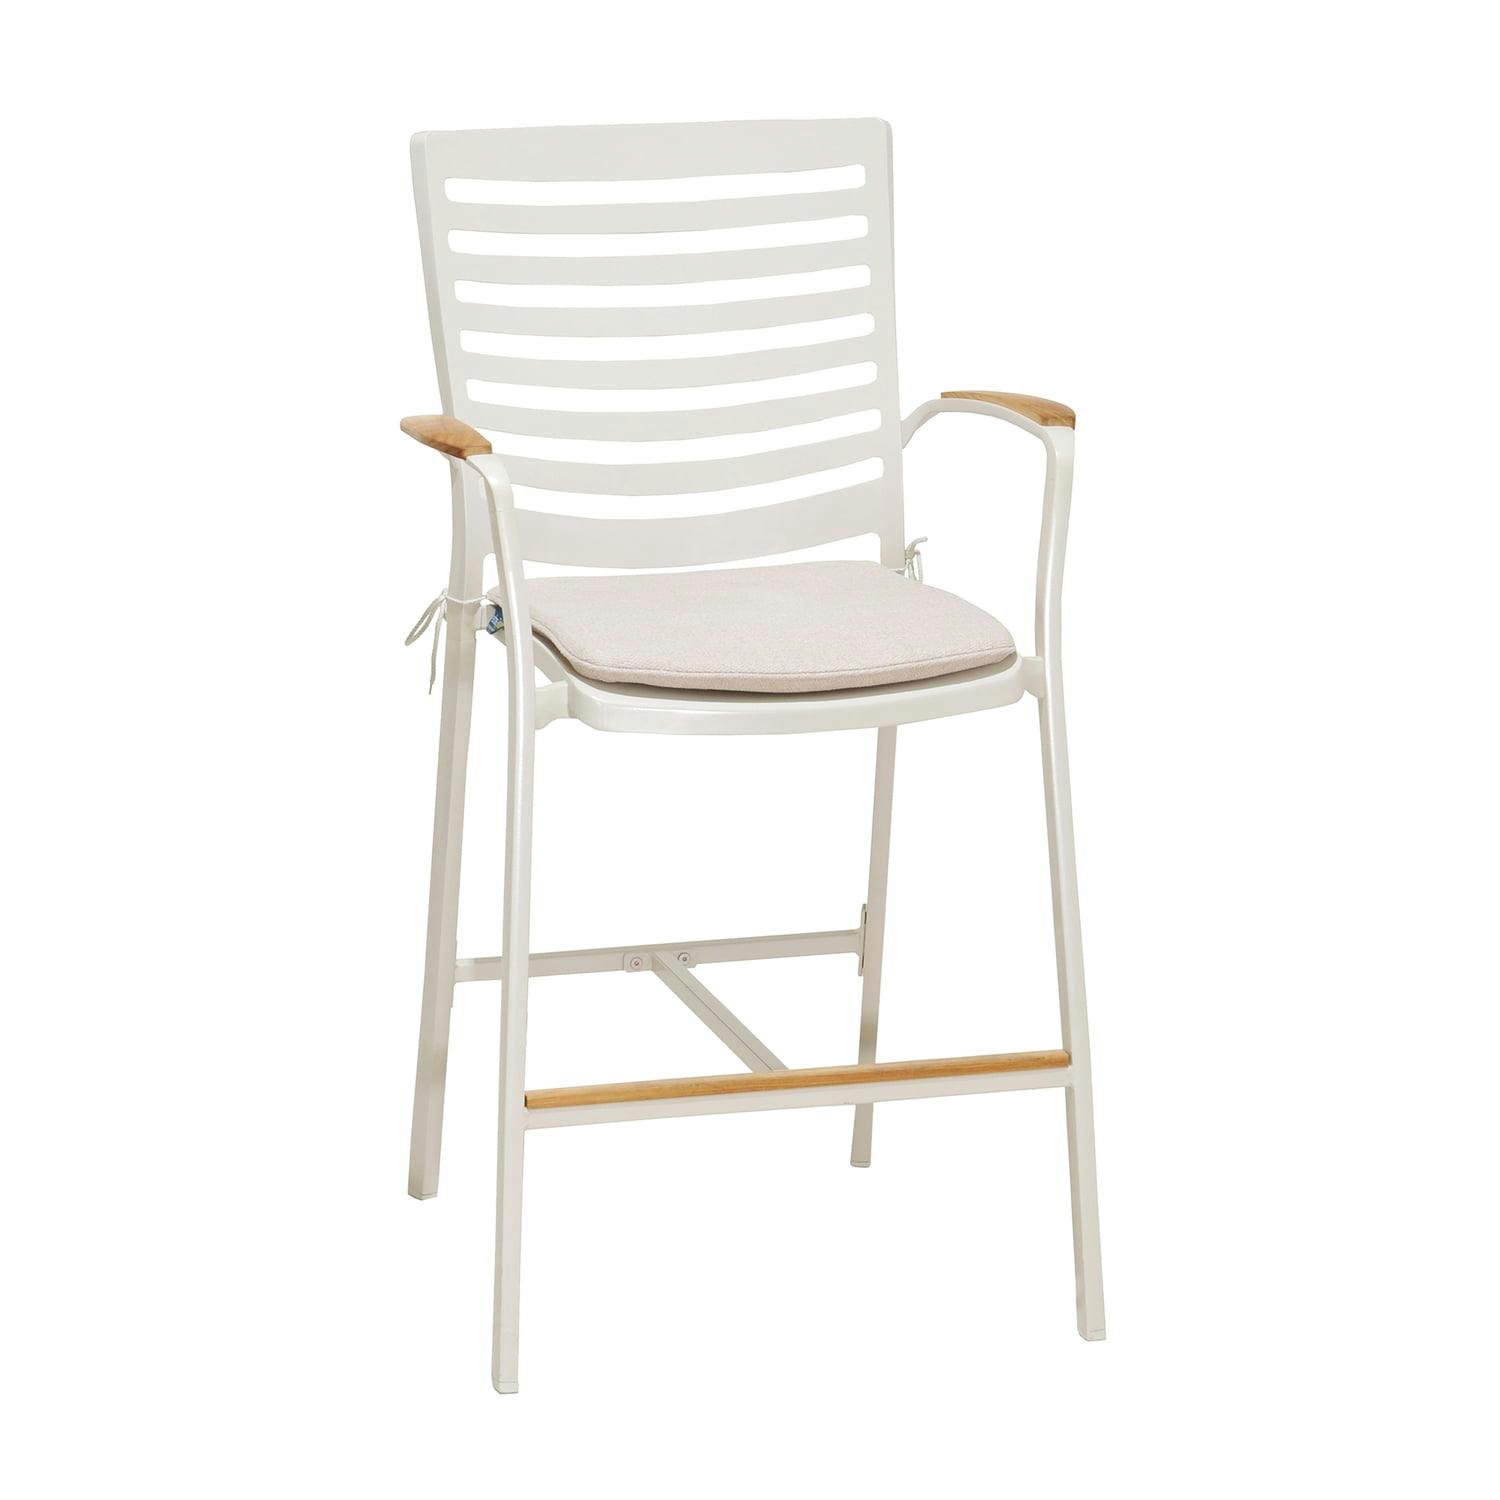 Contemporary Beige and White Bar Stool with Teak Wood Accents